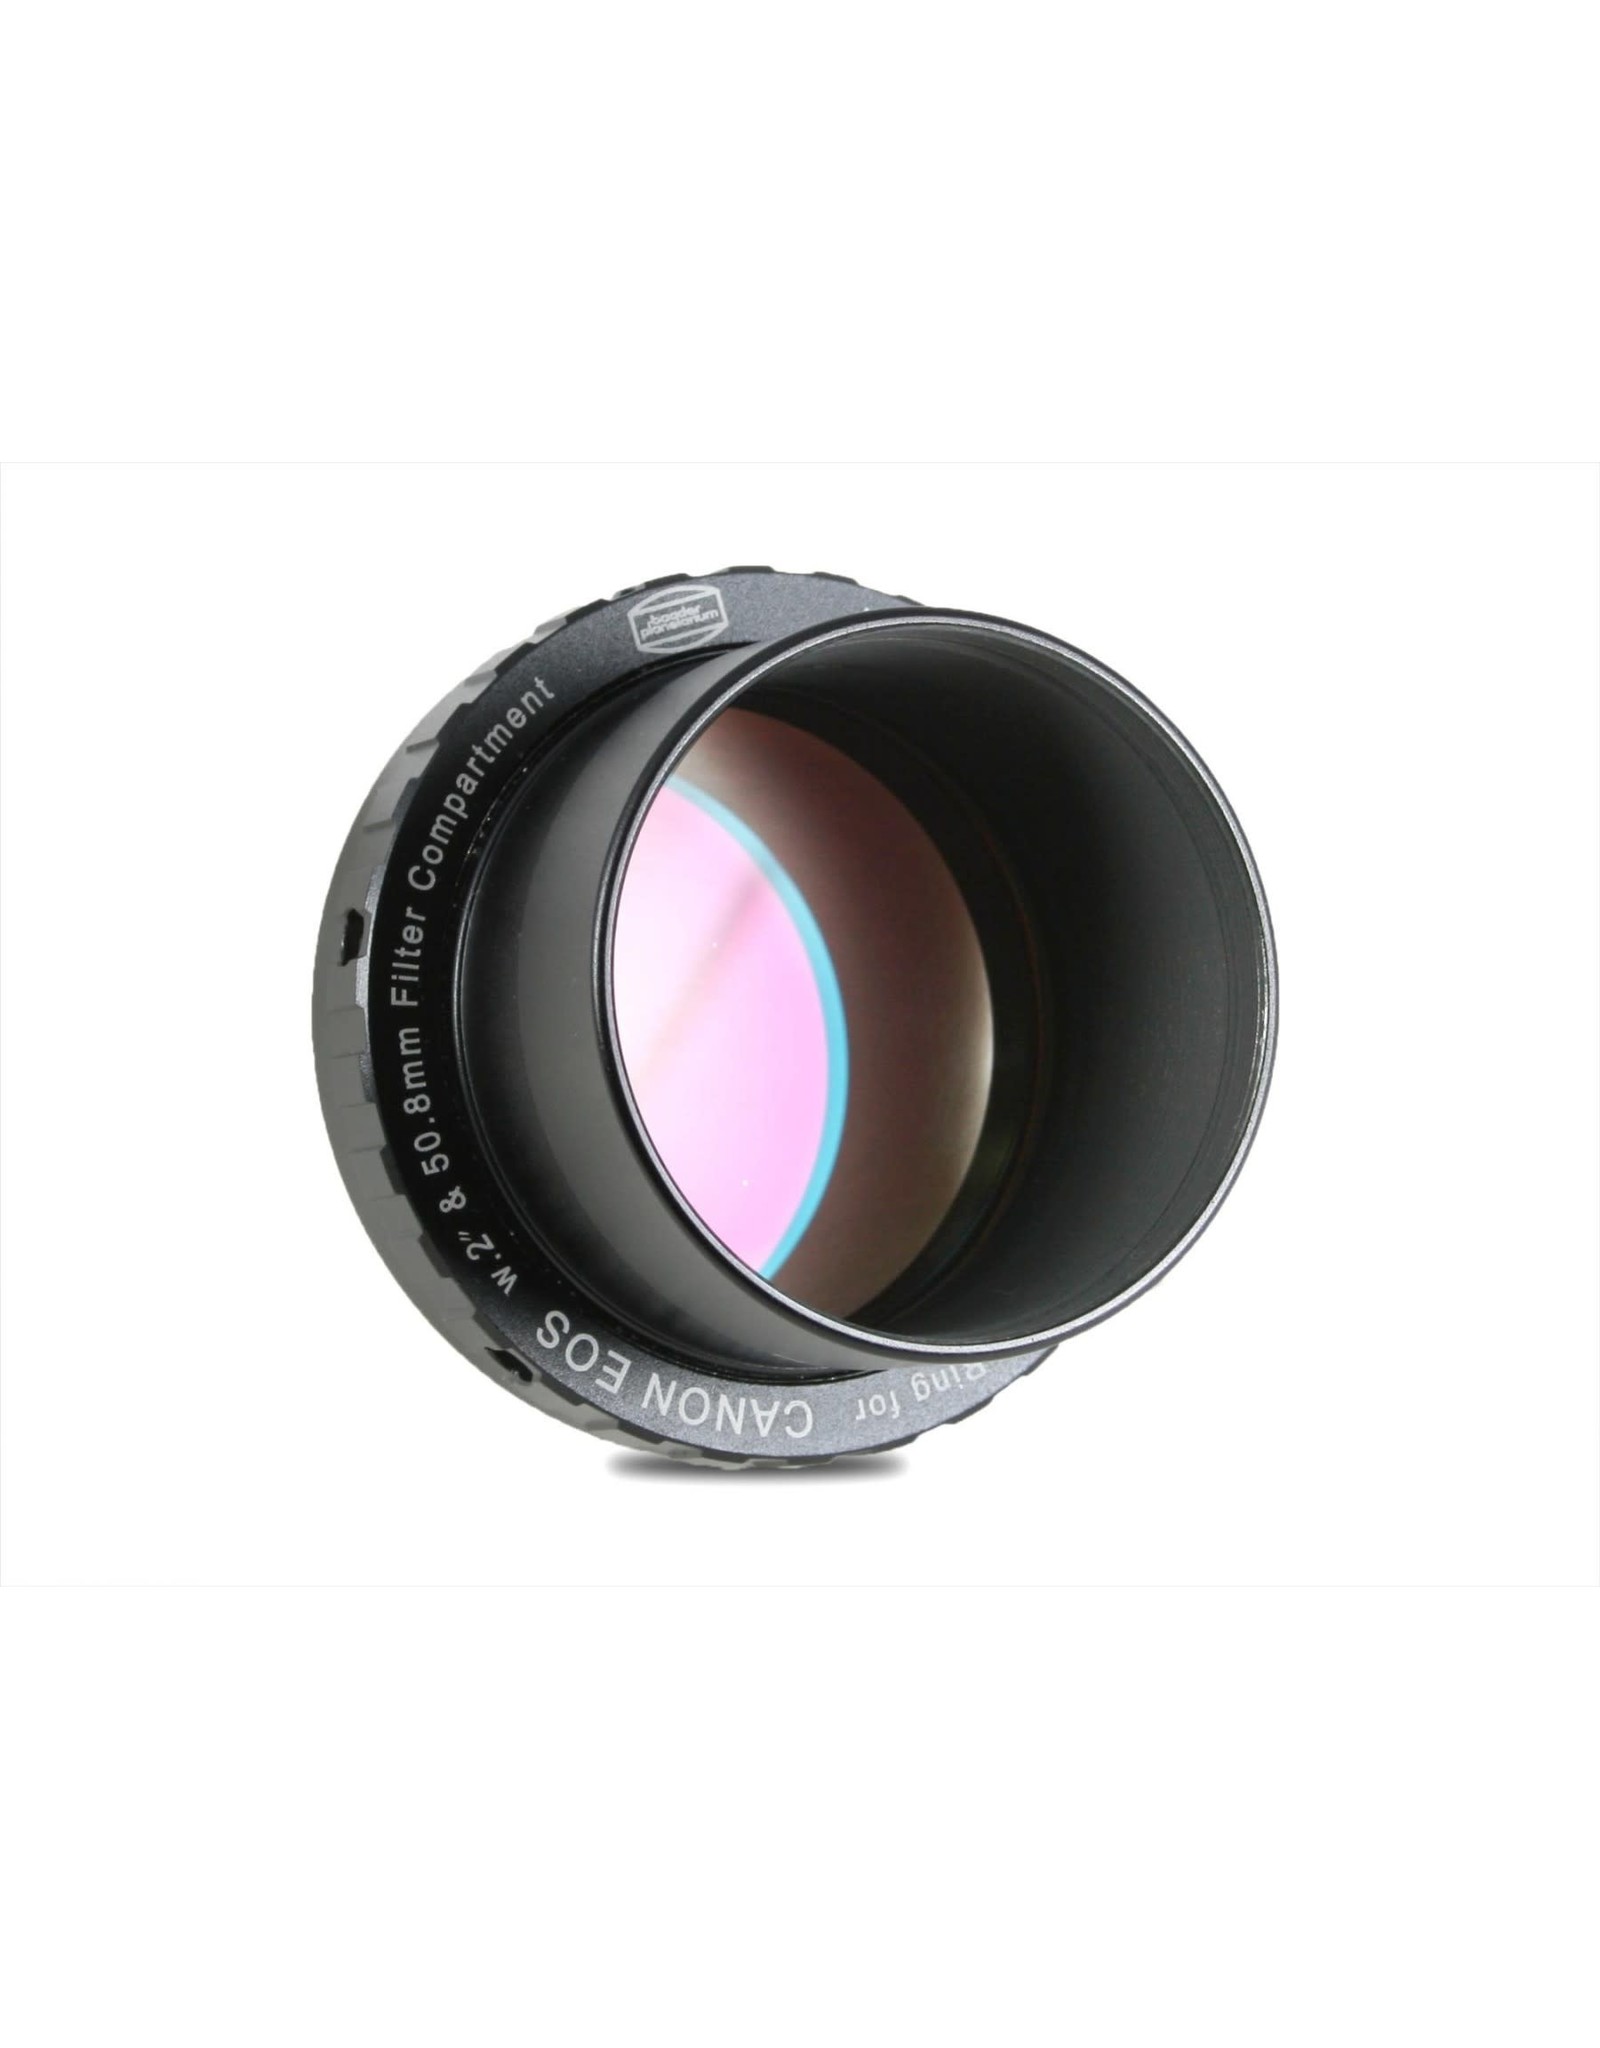 Baader Planetarium Baader zero-tolerance protective Canon DSLR T-Ring T-2/M48 and 2"